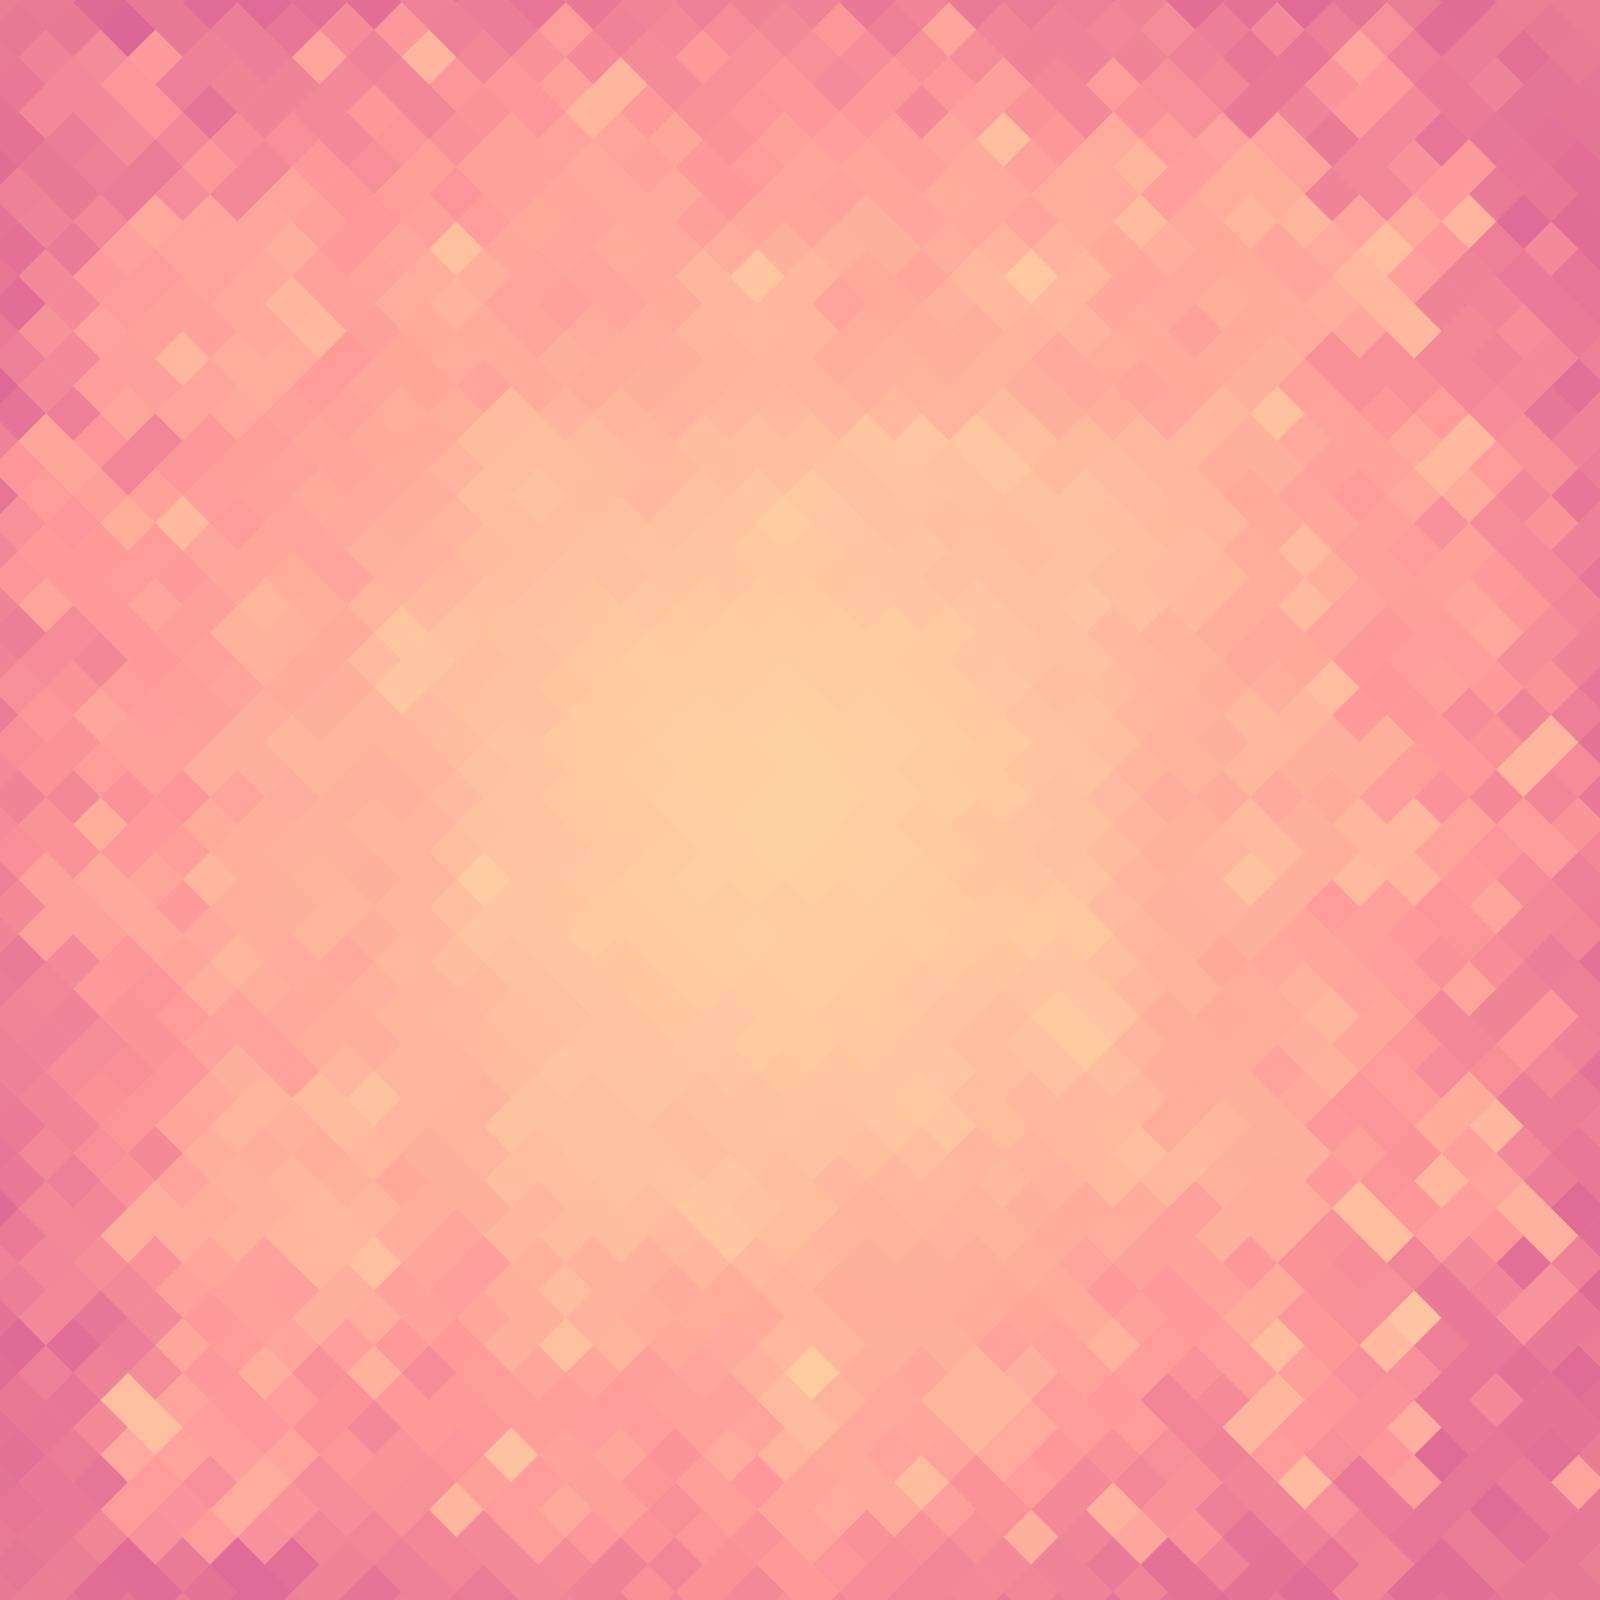 Pink Pixel Background. Pixelated Square Pattern. Pixelated Texture. Abstract Mosaic Modern Design by valeo5